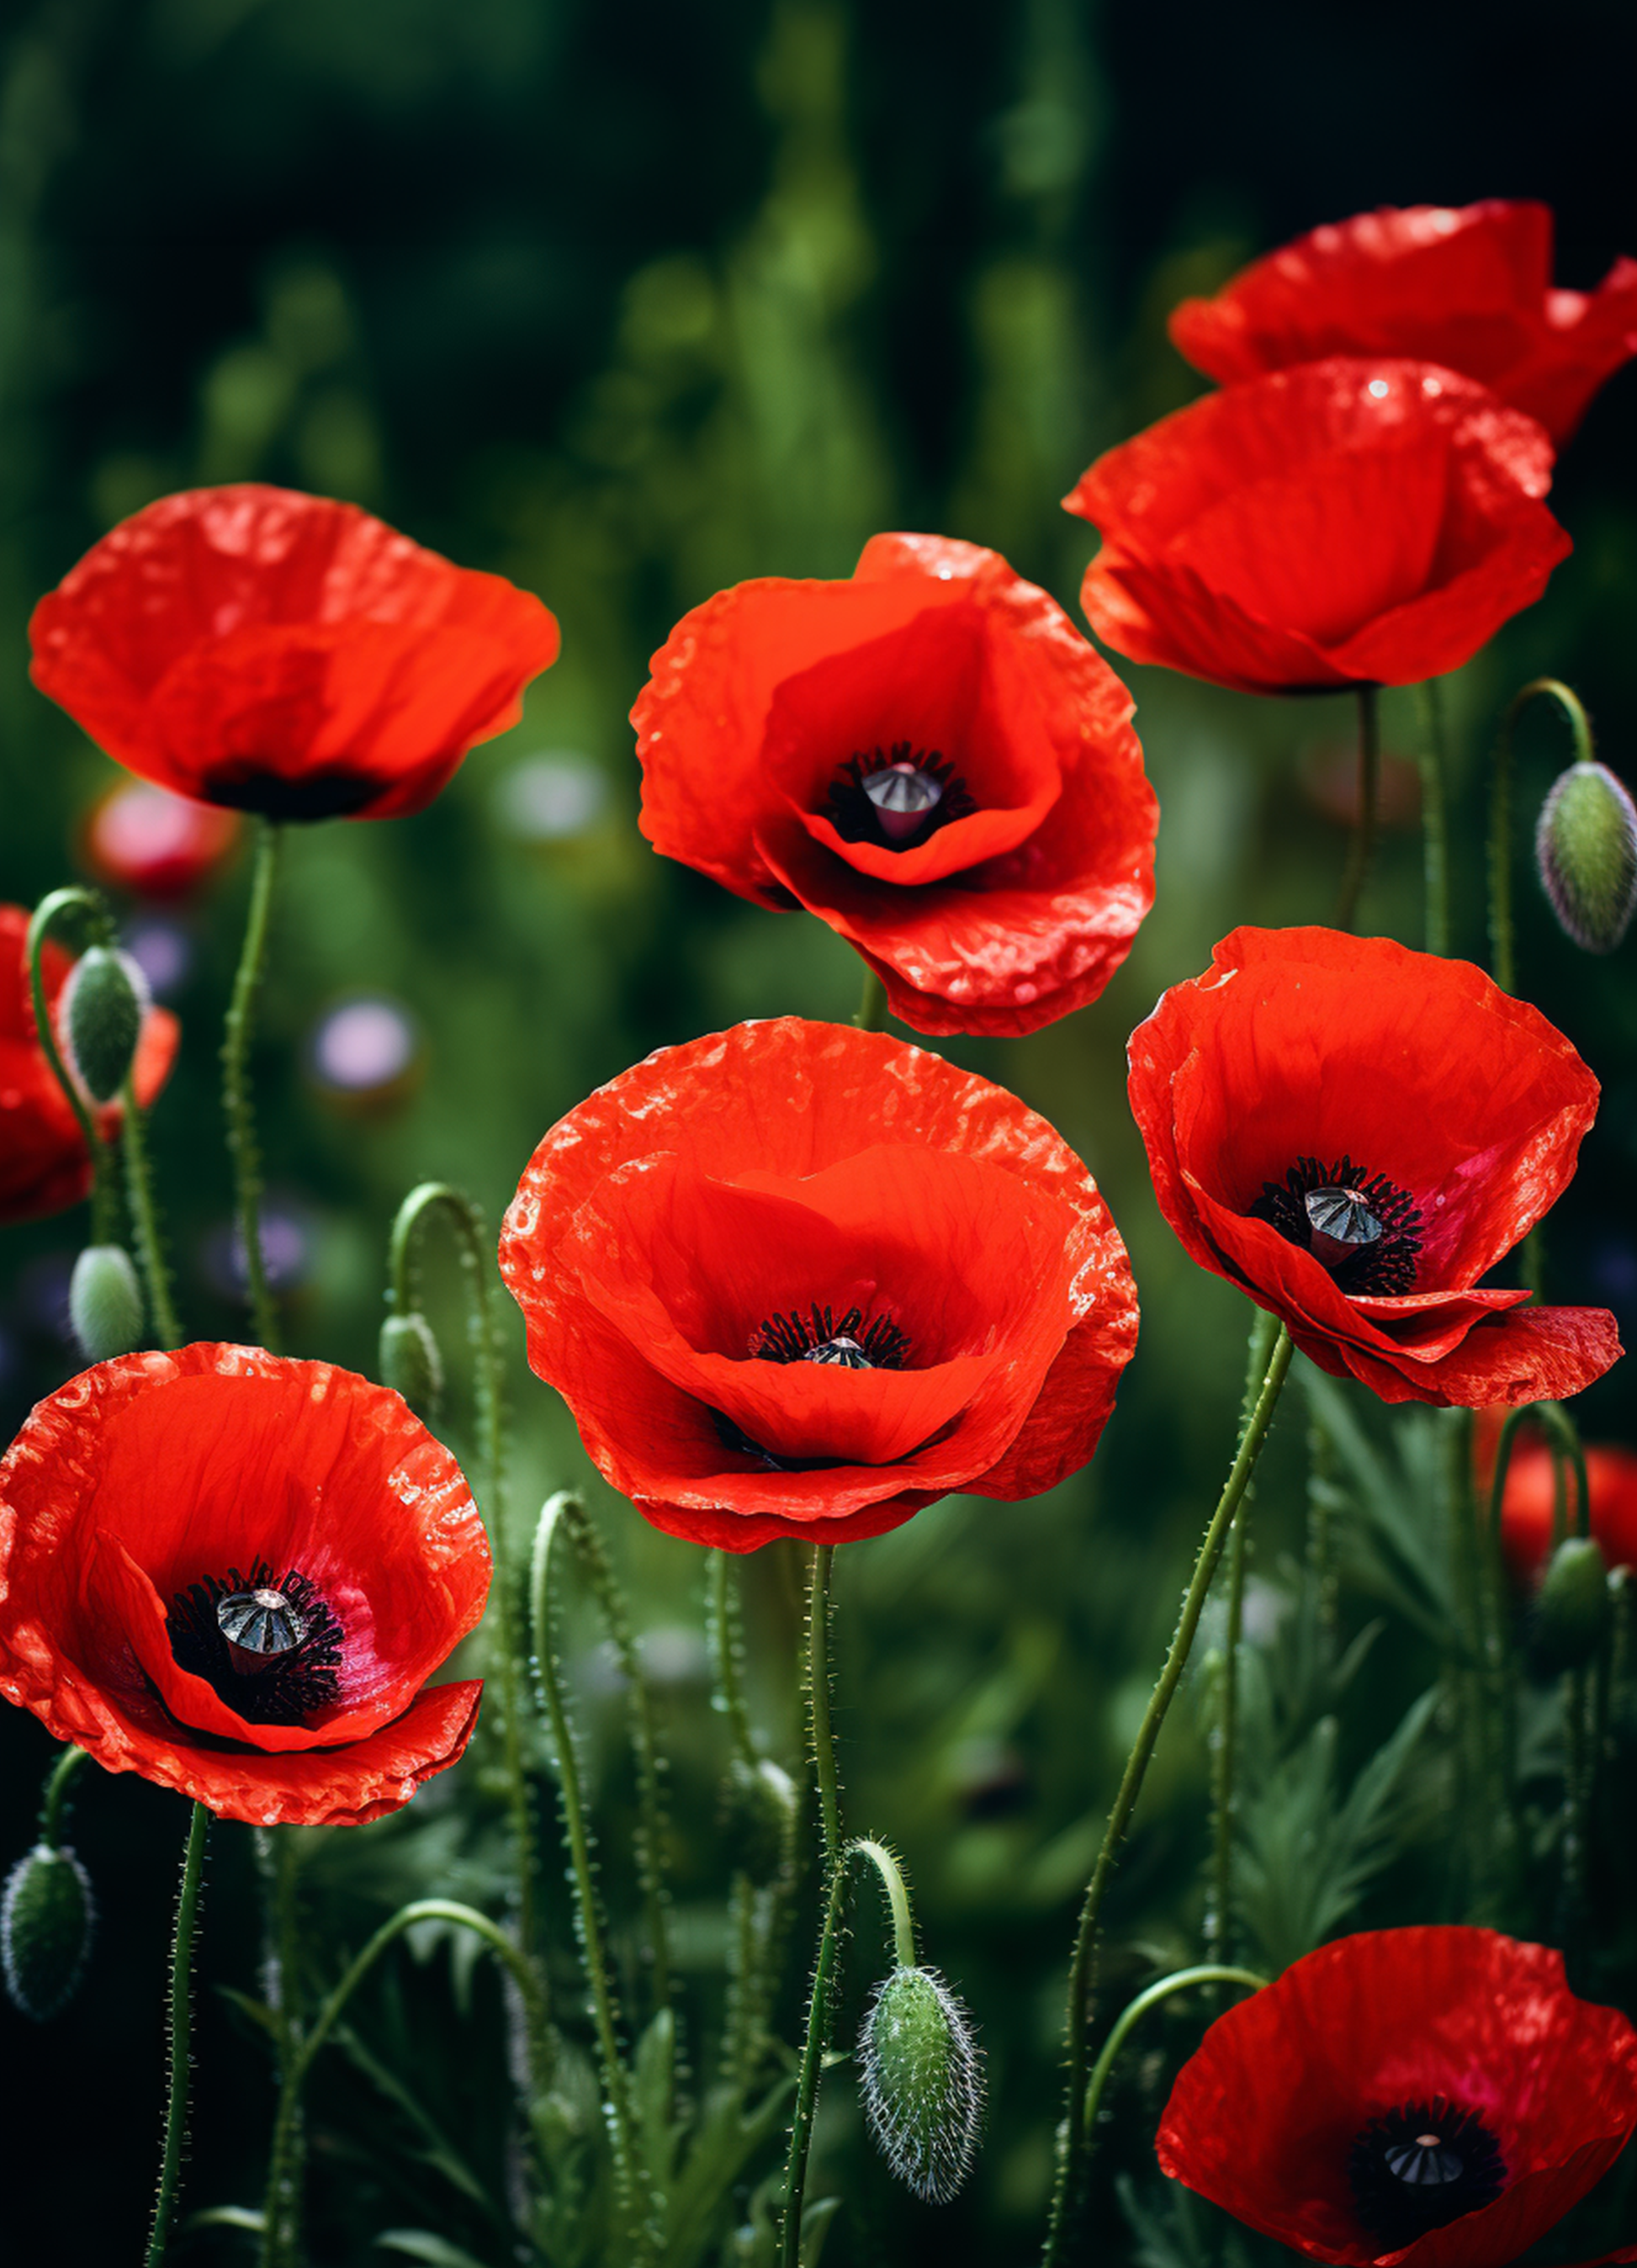 Poppy, Flanders, 500+ Seeds, Stunning Bright Red Flower, Great Poppies